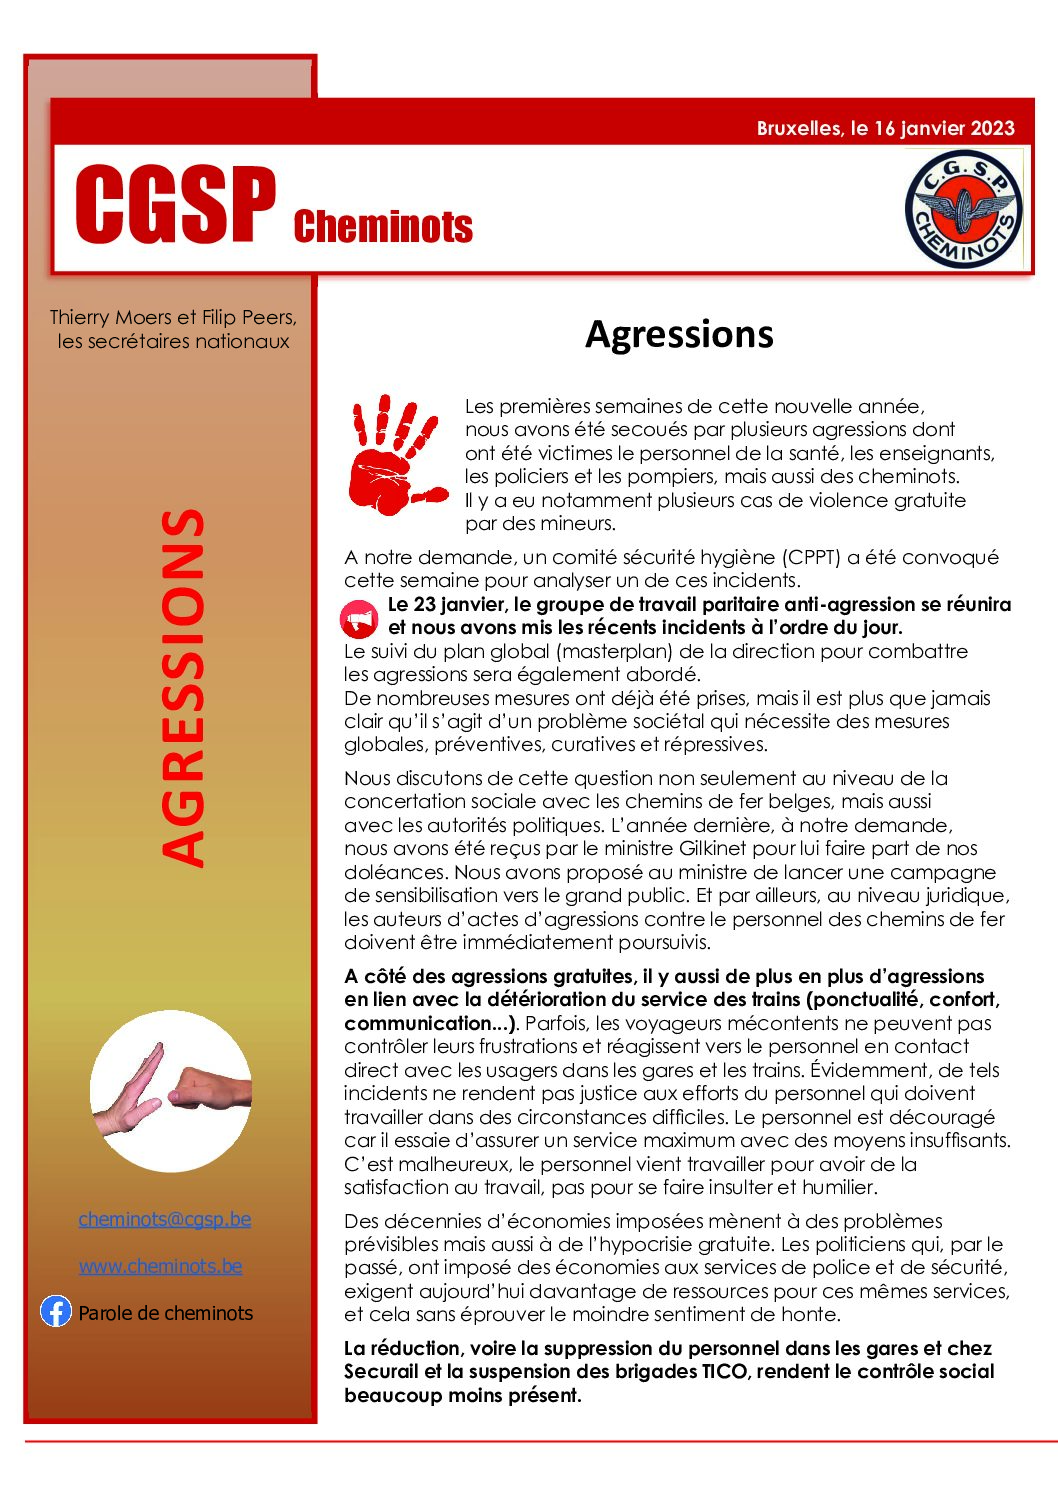 Agressions